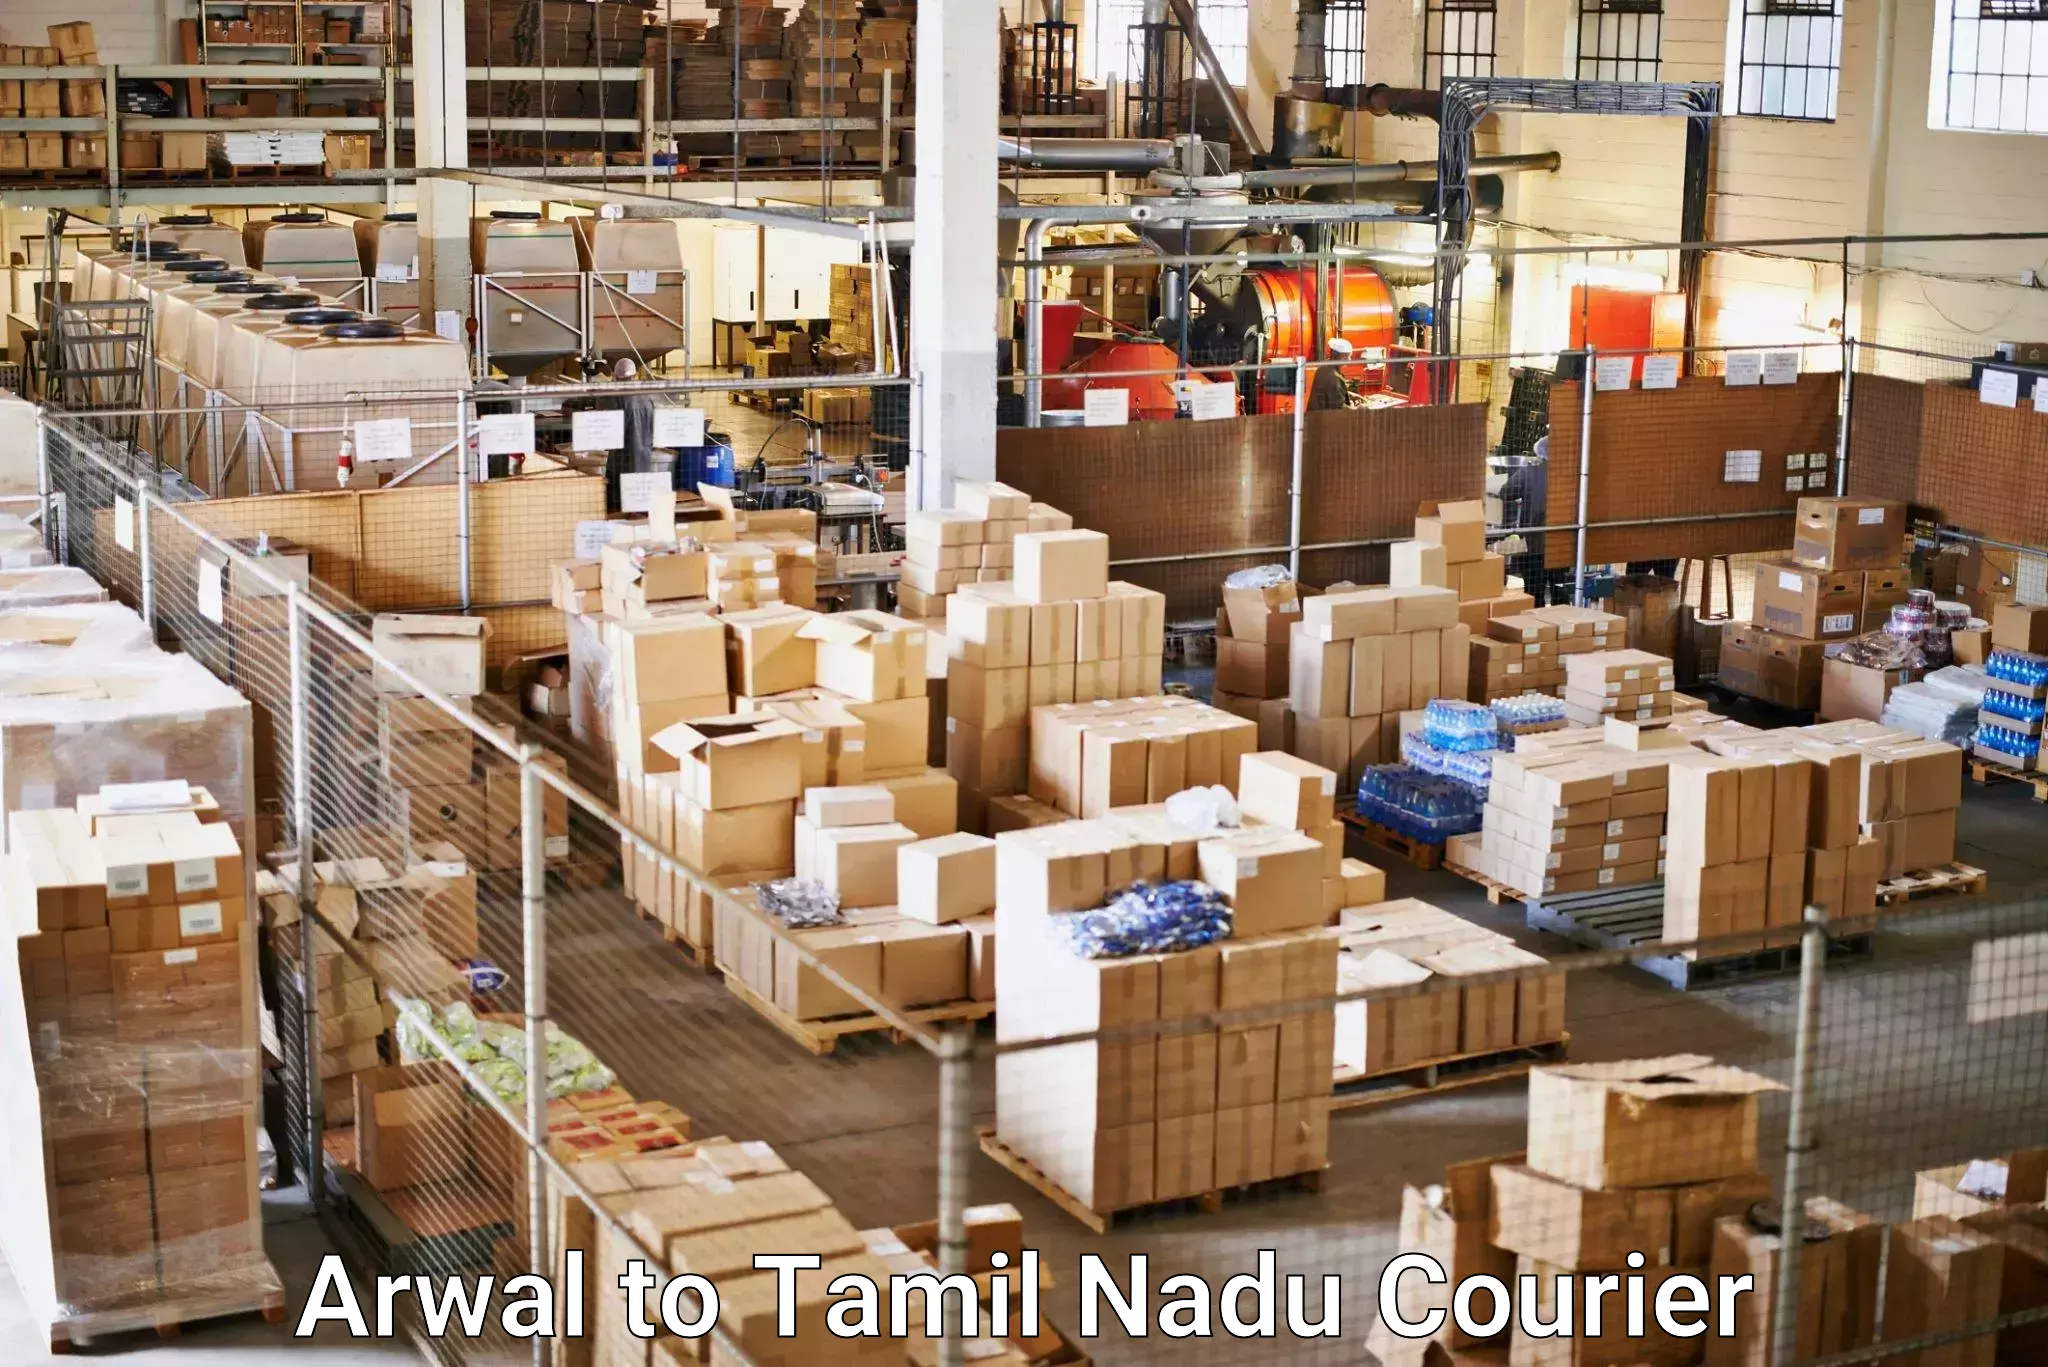 Courier service booking Arwal to Tuticorin Port